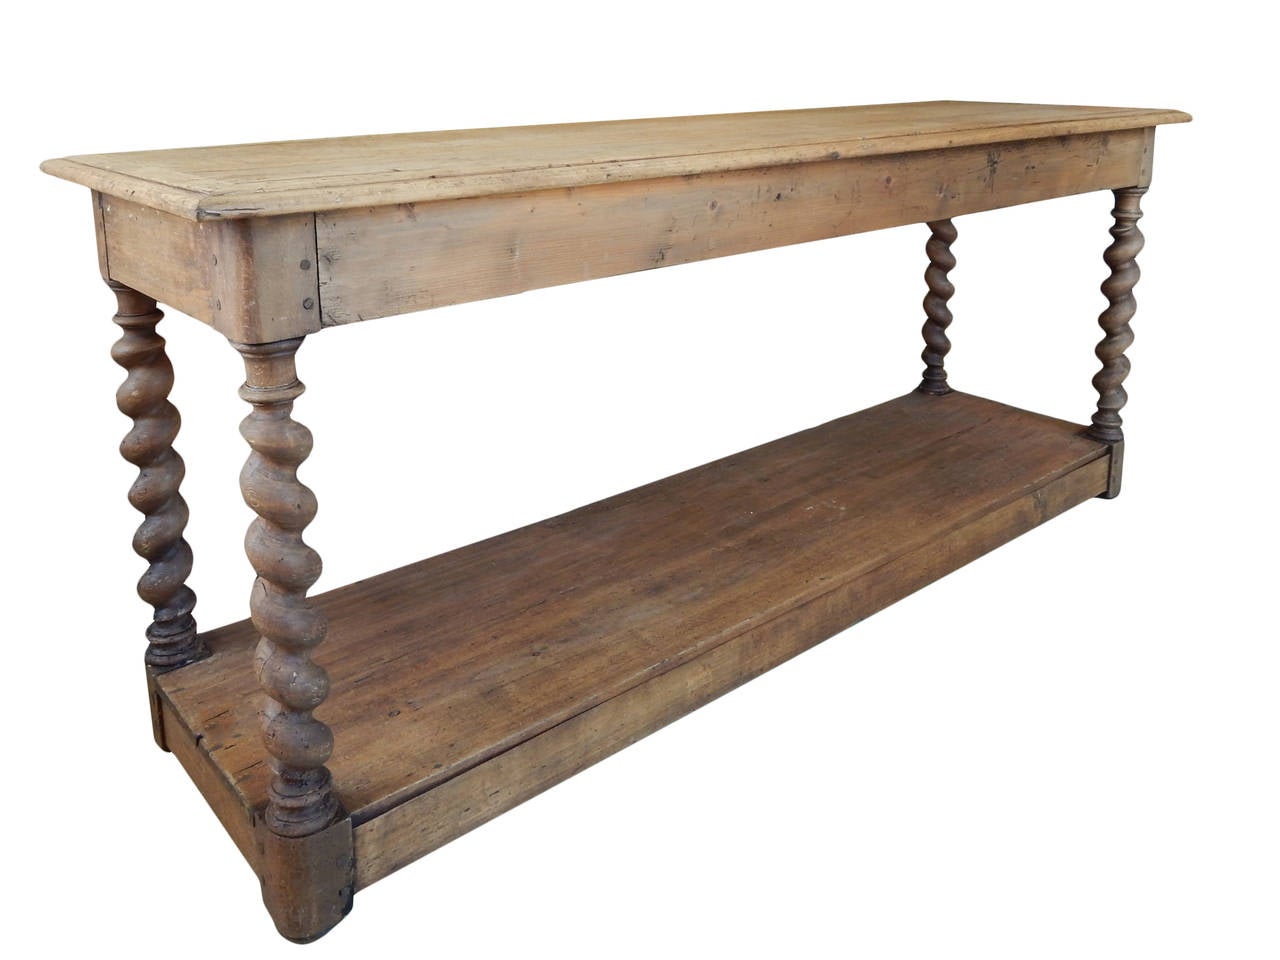 Belgian walnut barley twist drapers table with stripped finish with great age patina.